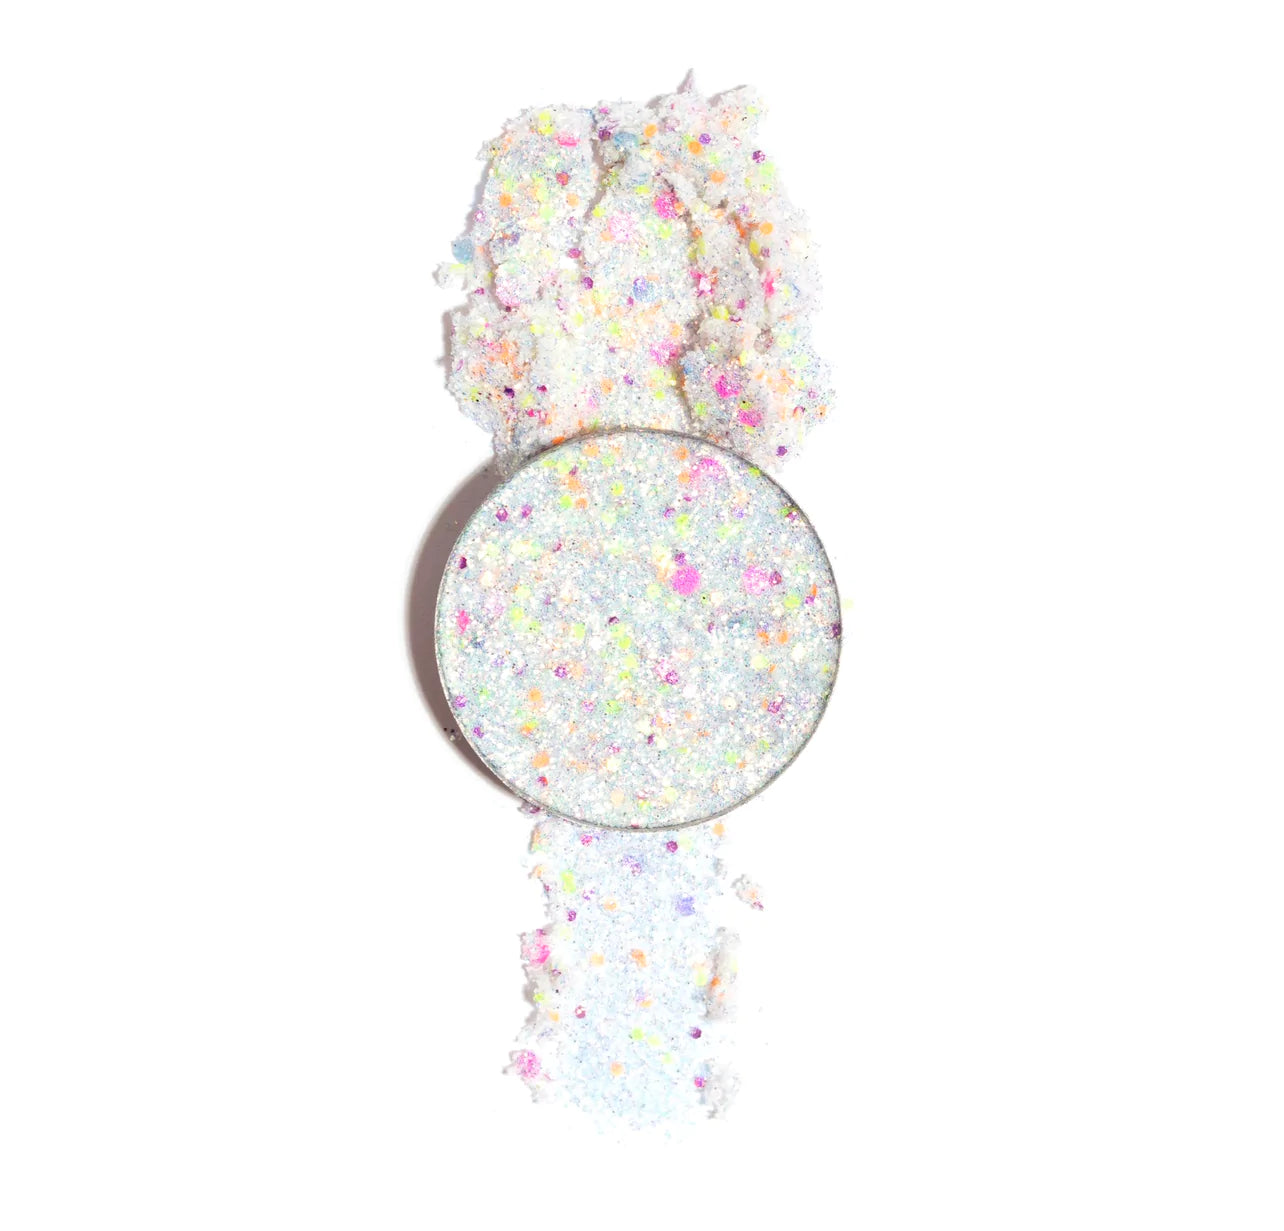 Load image into Gallery viewer, With Love Cosmetics Limited Edition Pressed Glitter - Confetti
